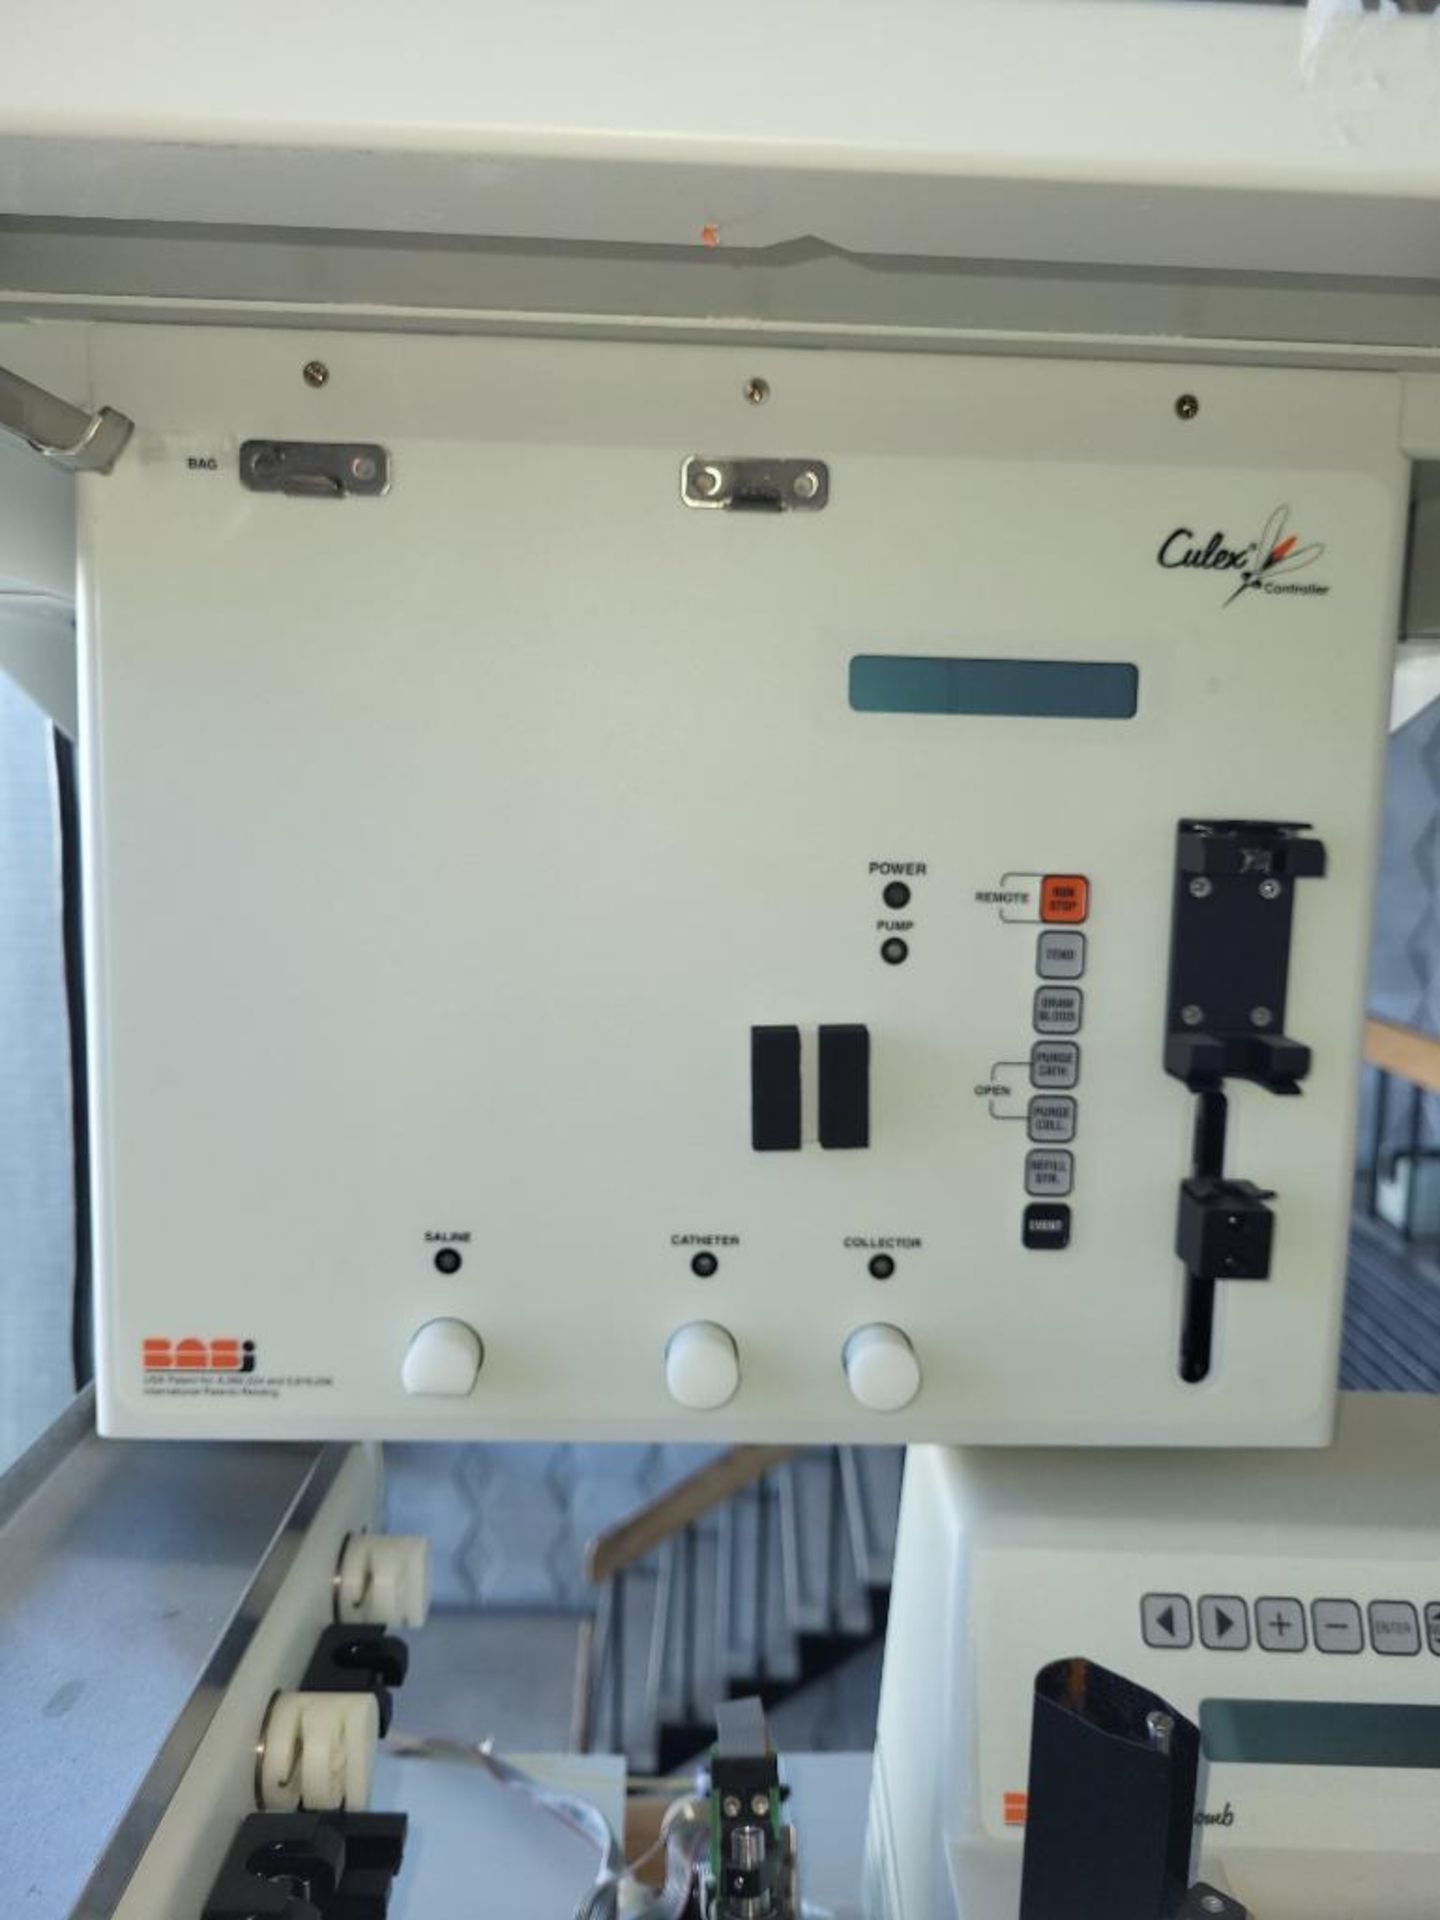 CULEX Micro-Dialysis System w/CULEX EMPIS Programmable Infusion System and CULEX HoneyComb - Image 5 of 6